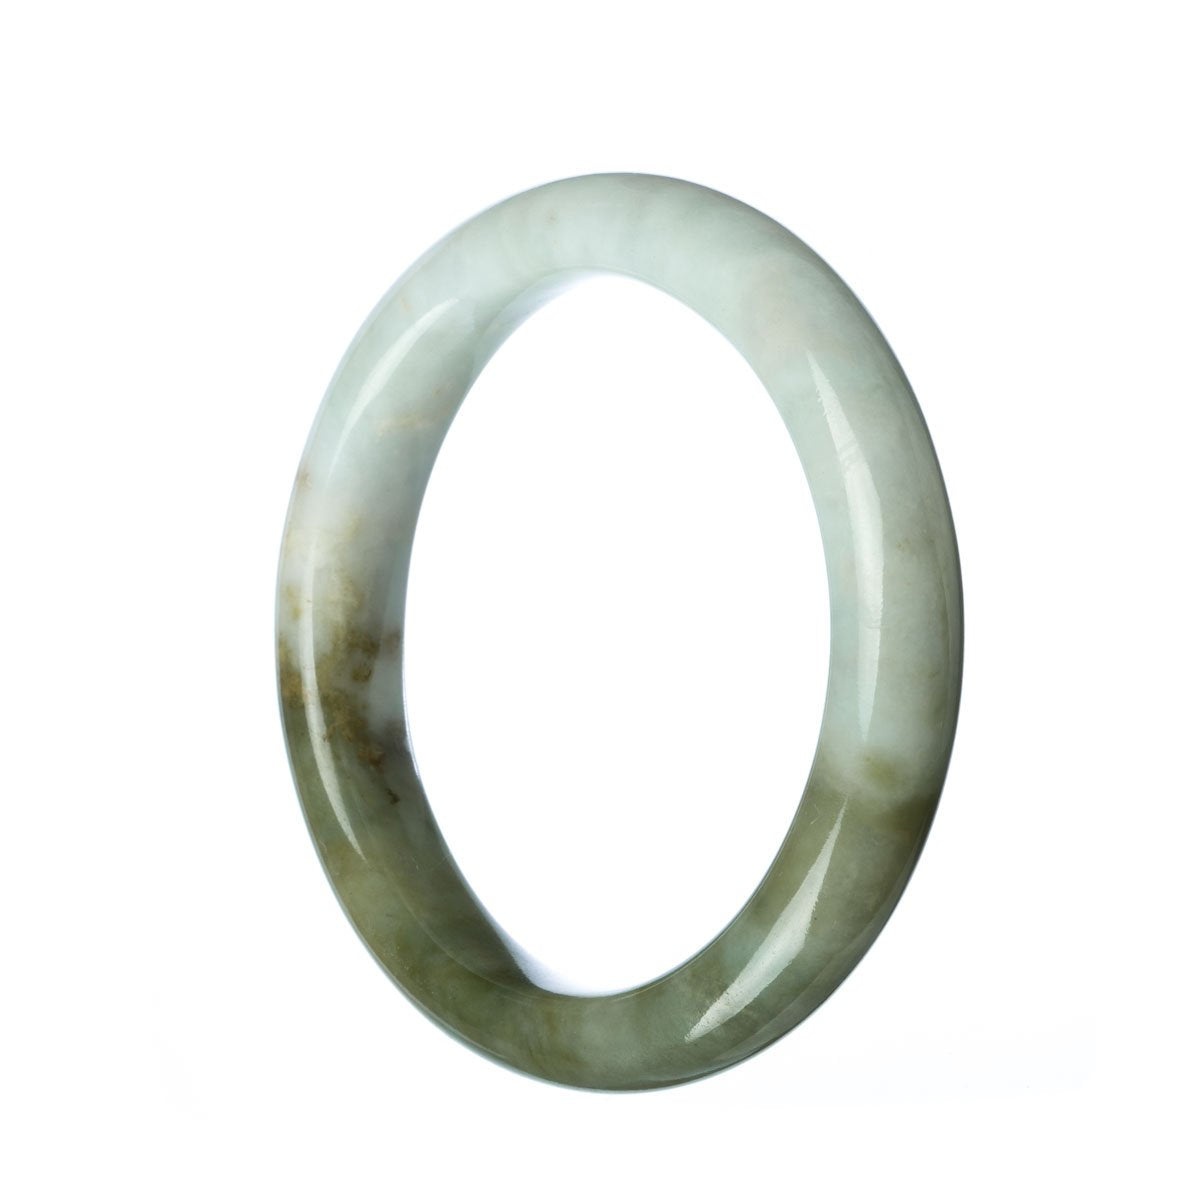 A close-up image of a green and white traditional jade bangle with a semi-round shape. The bangle is made of genuine Type A jade and has a diameter of 59mm. It is a beautiful and timeless piece of jewelry from MAYS.